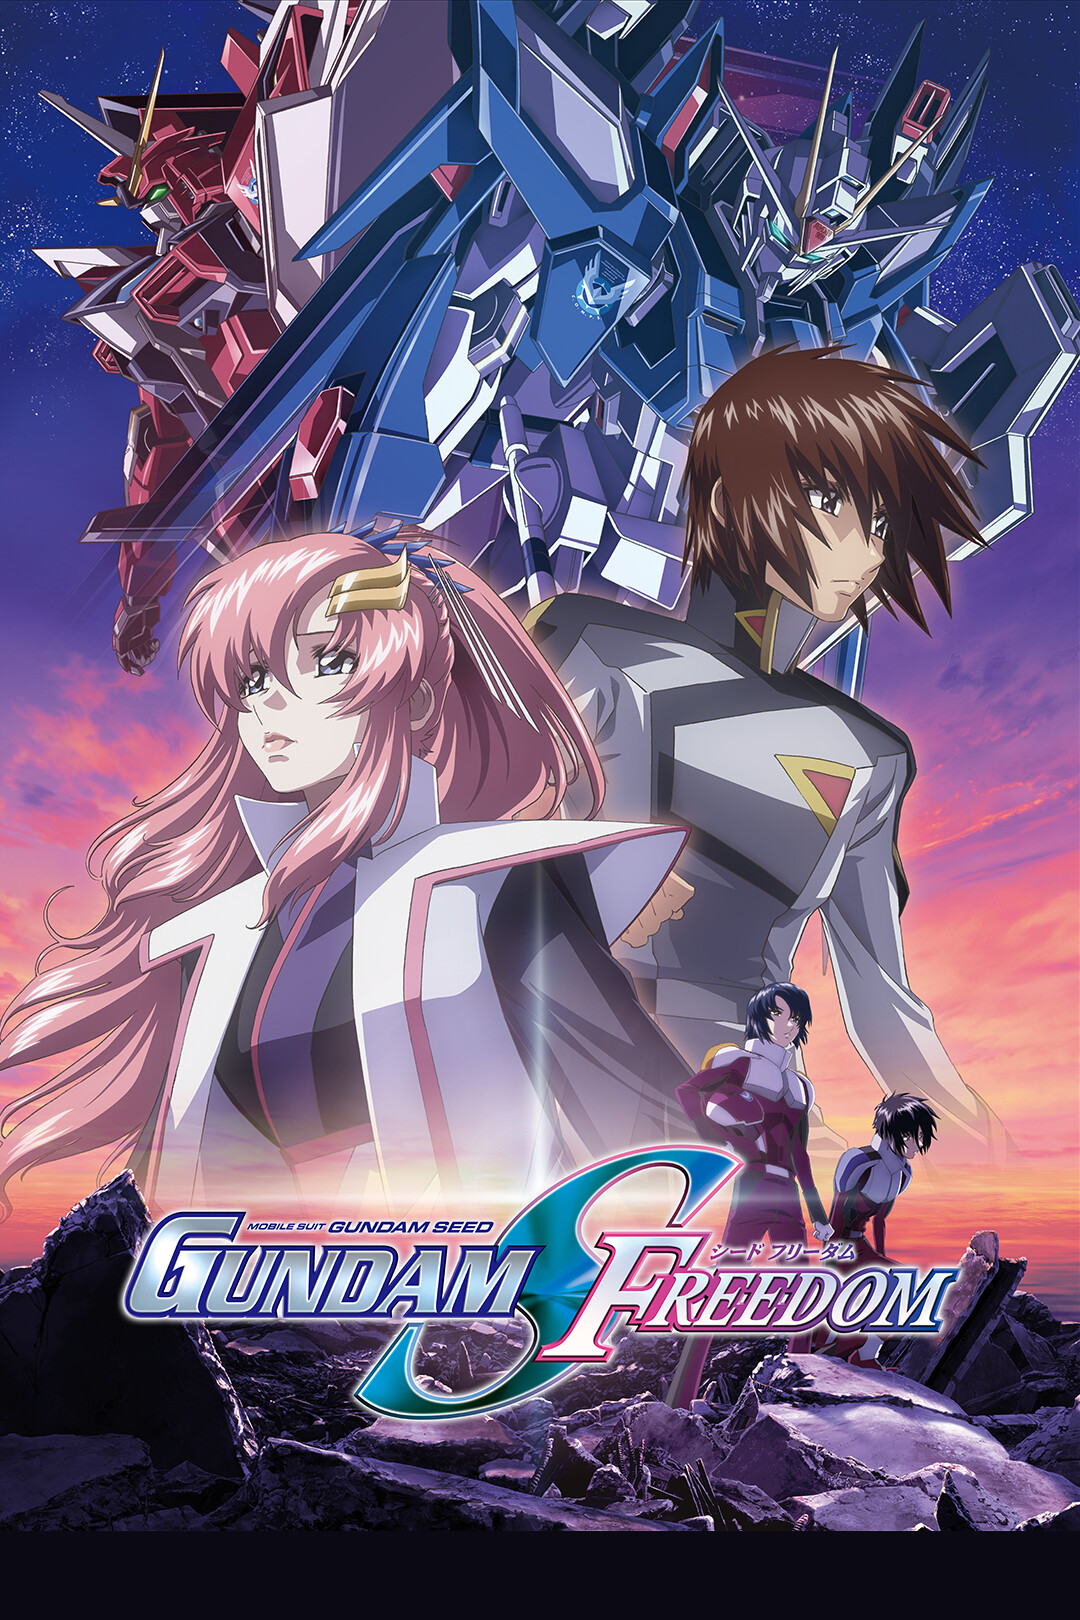 Mobile Suit Gundam SEED FREEDOM - Poster